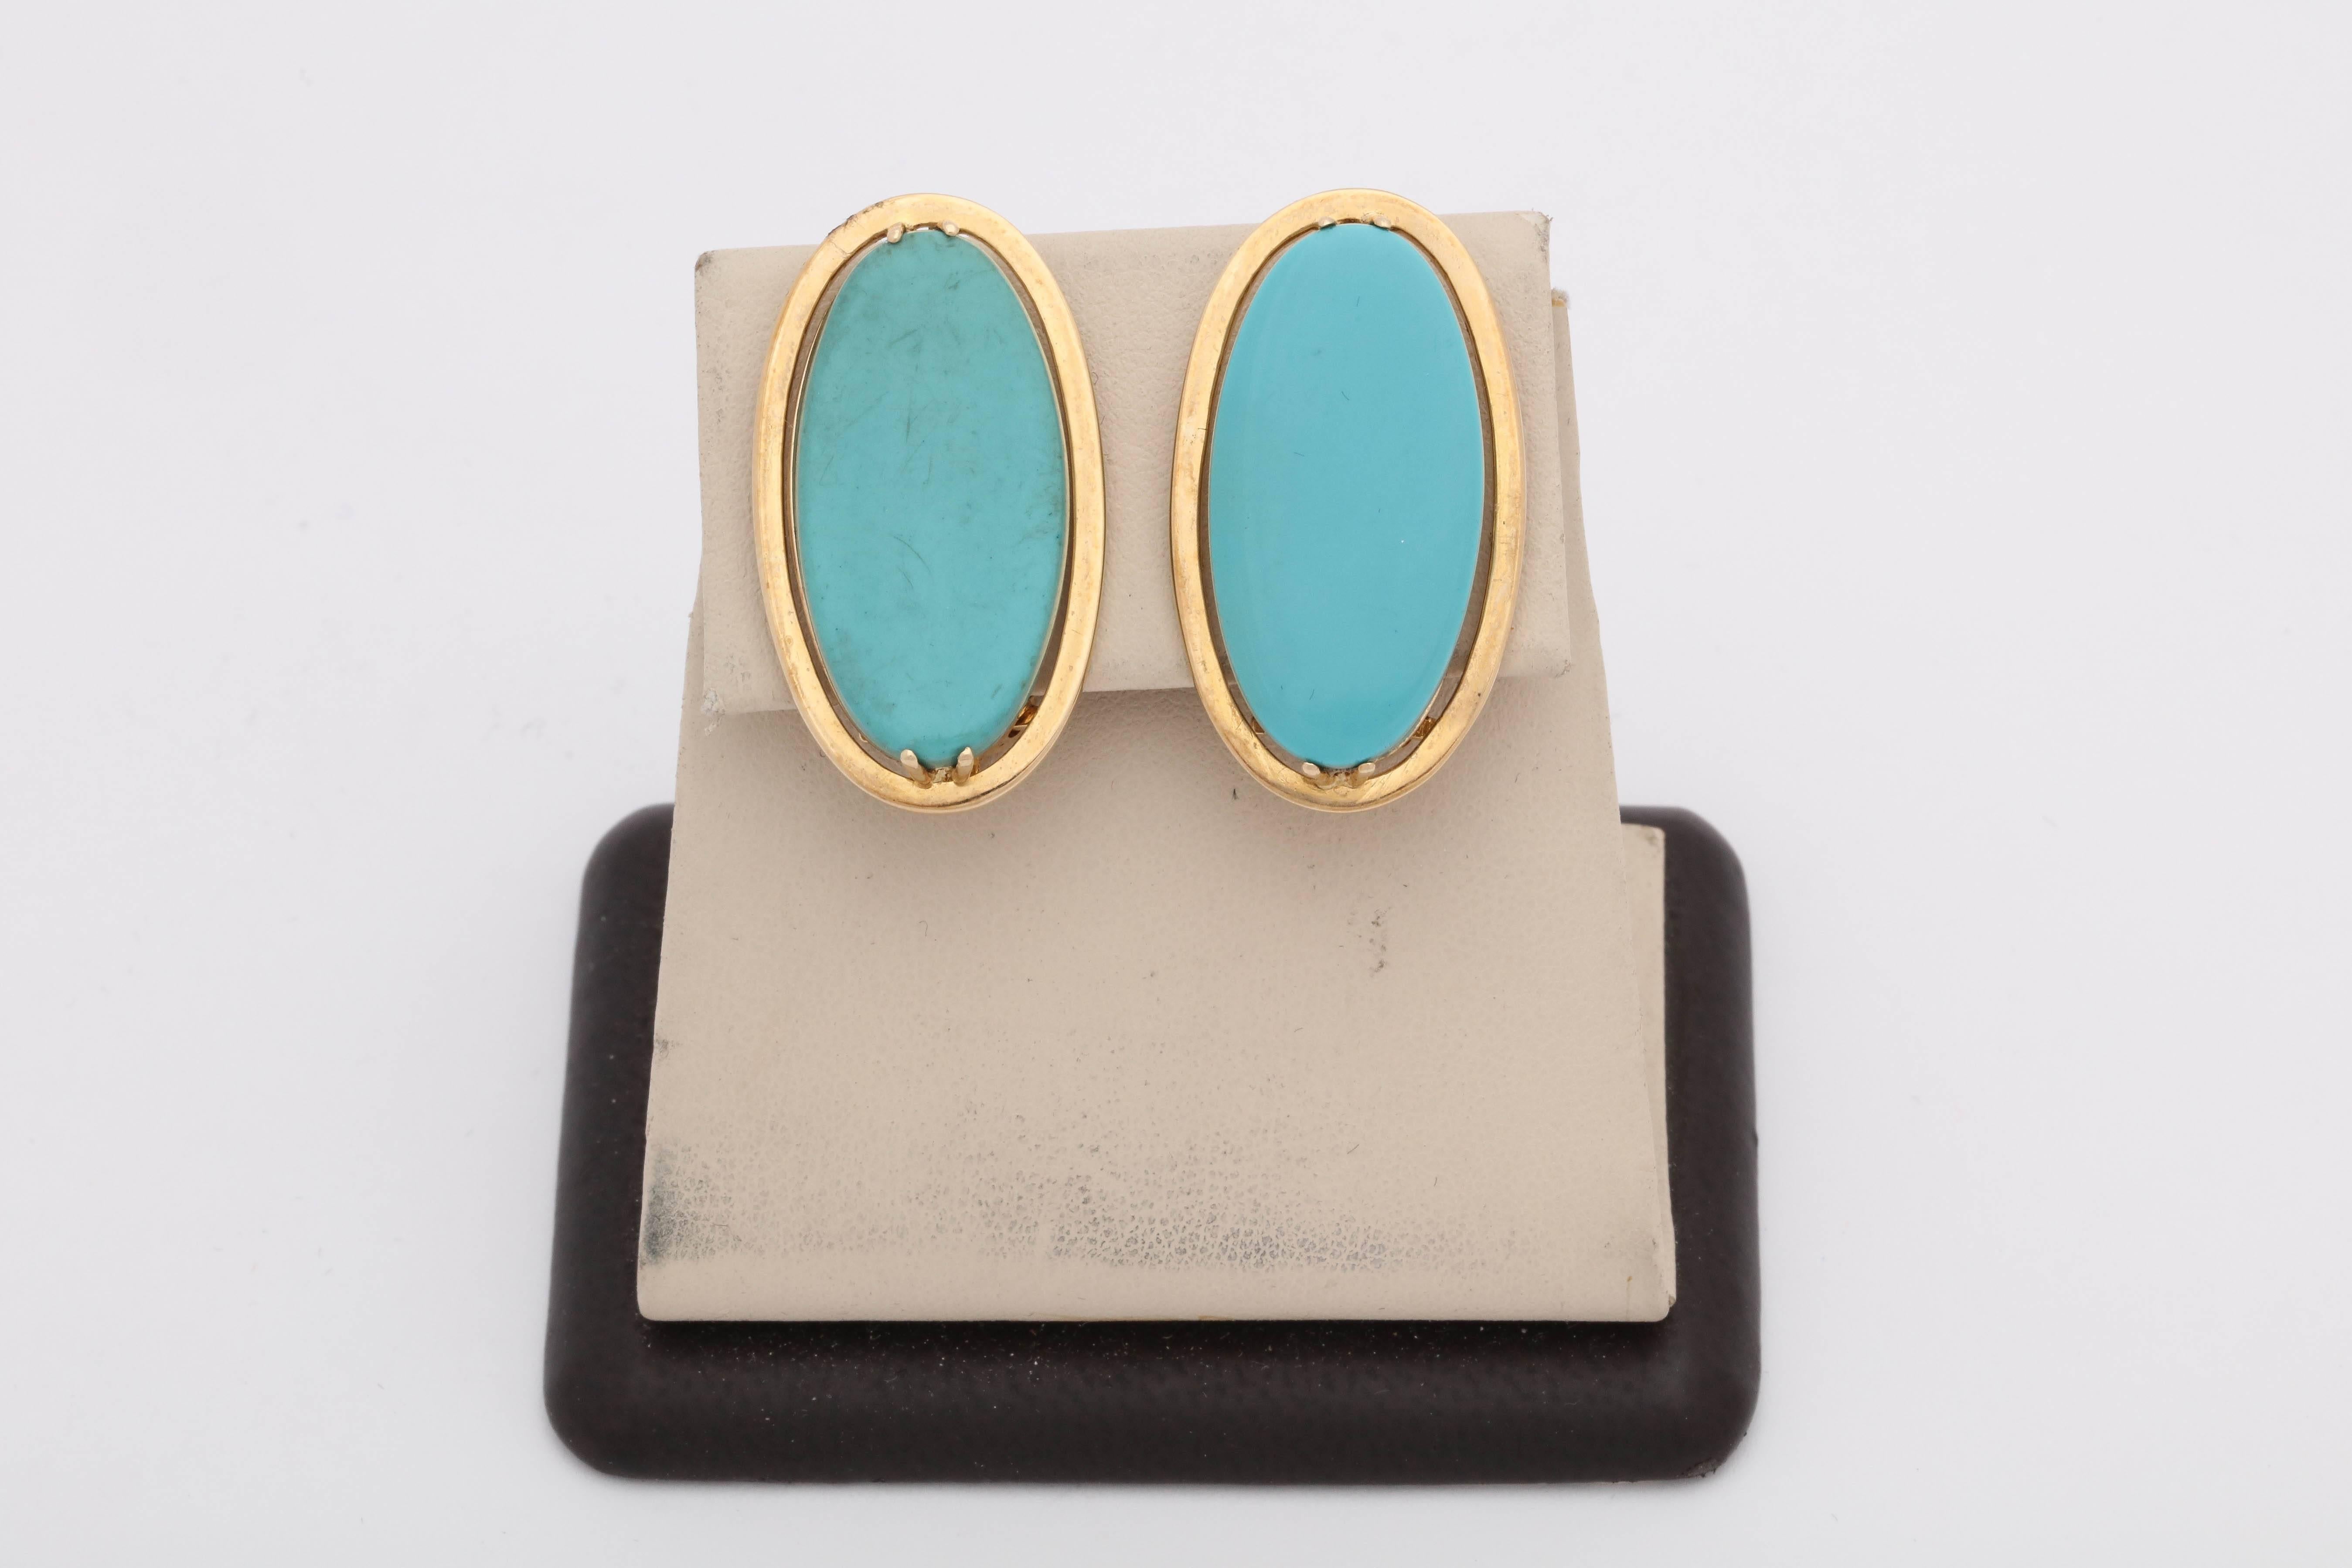 One Pair Of Ladies Large 18kt Gold Earclips With Fancy Clip On Backs. Earrings Are Centering Two Large Turquoise Oval Cut Stones Measuring Approximately 25Mm Each Stone. Designed In A Beautiful And Clean Bezel Setting With Eight Extra Prongs Holding